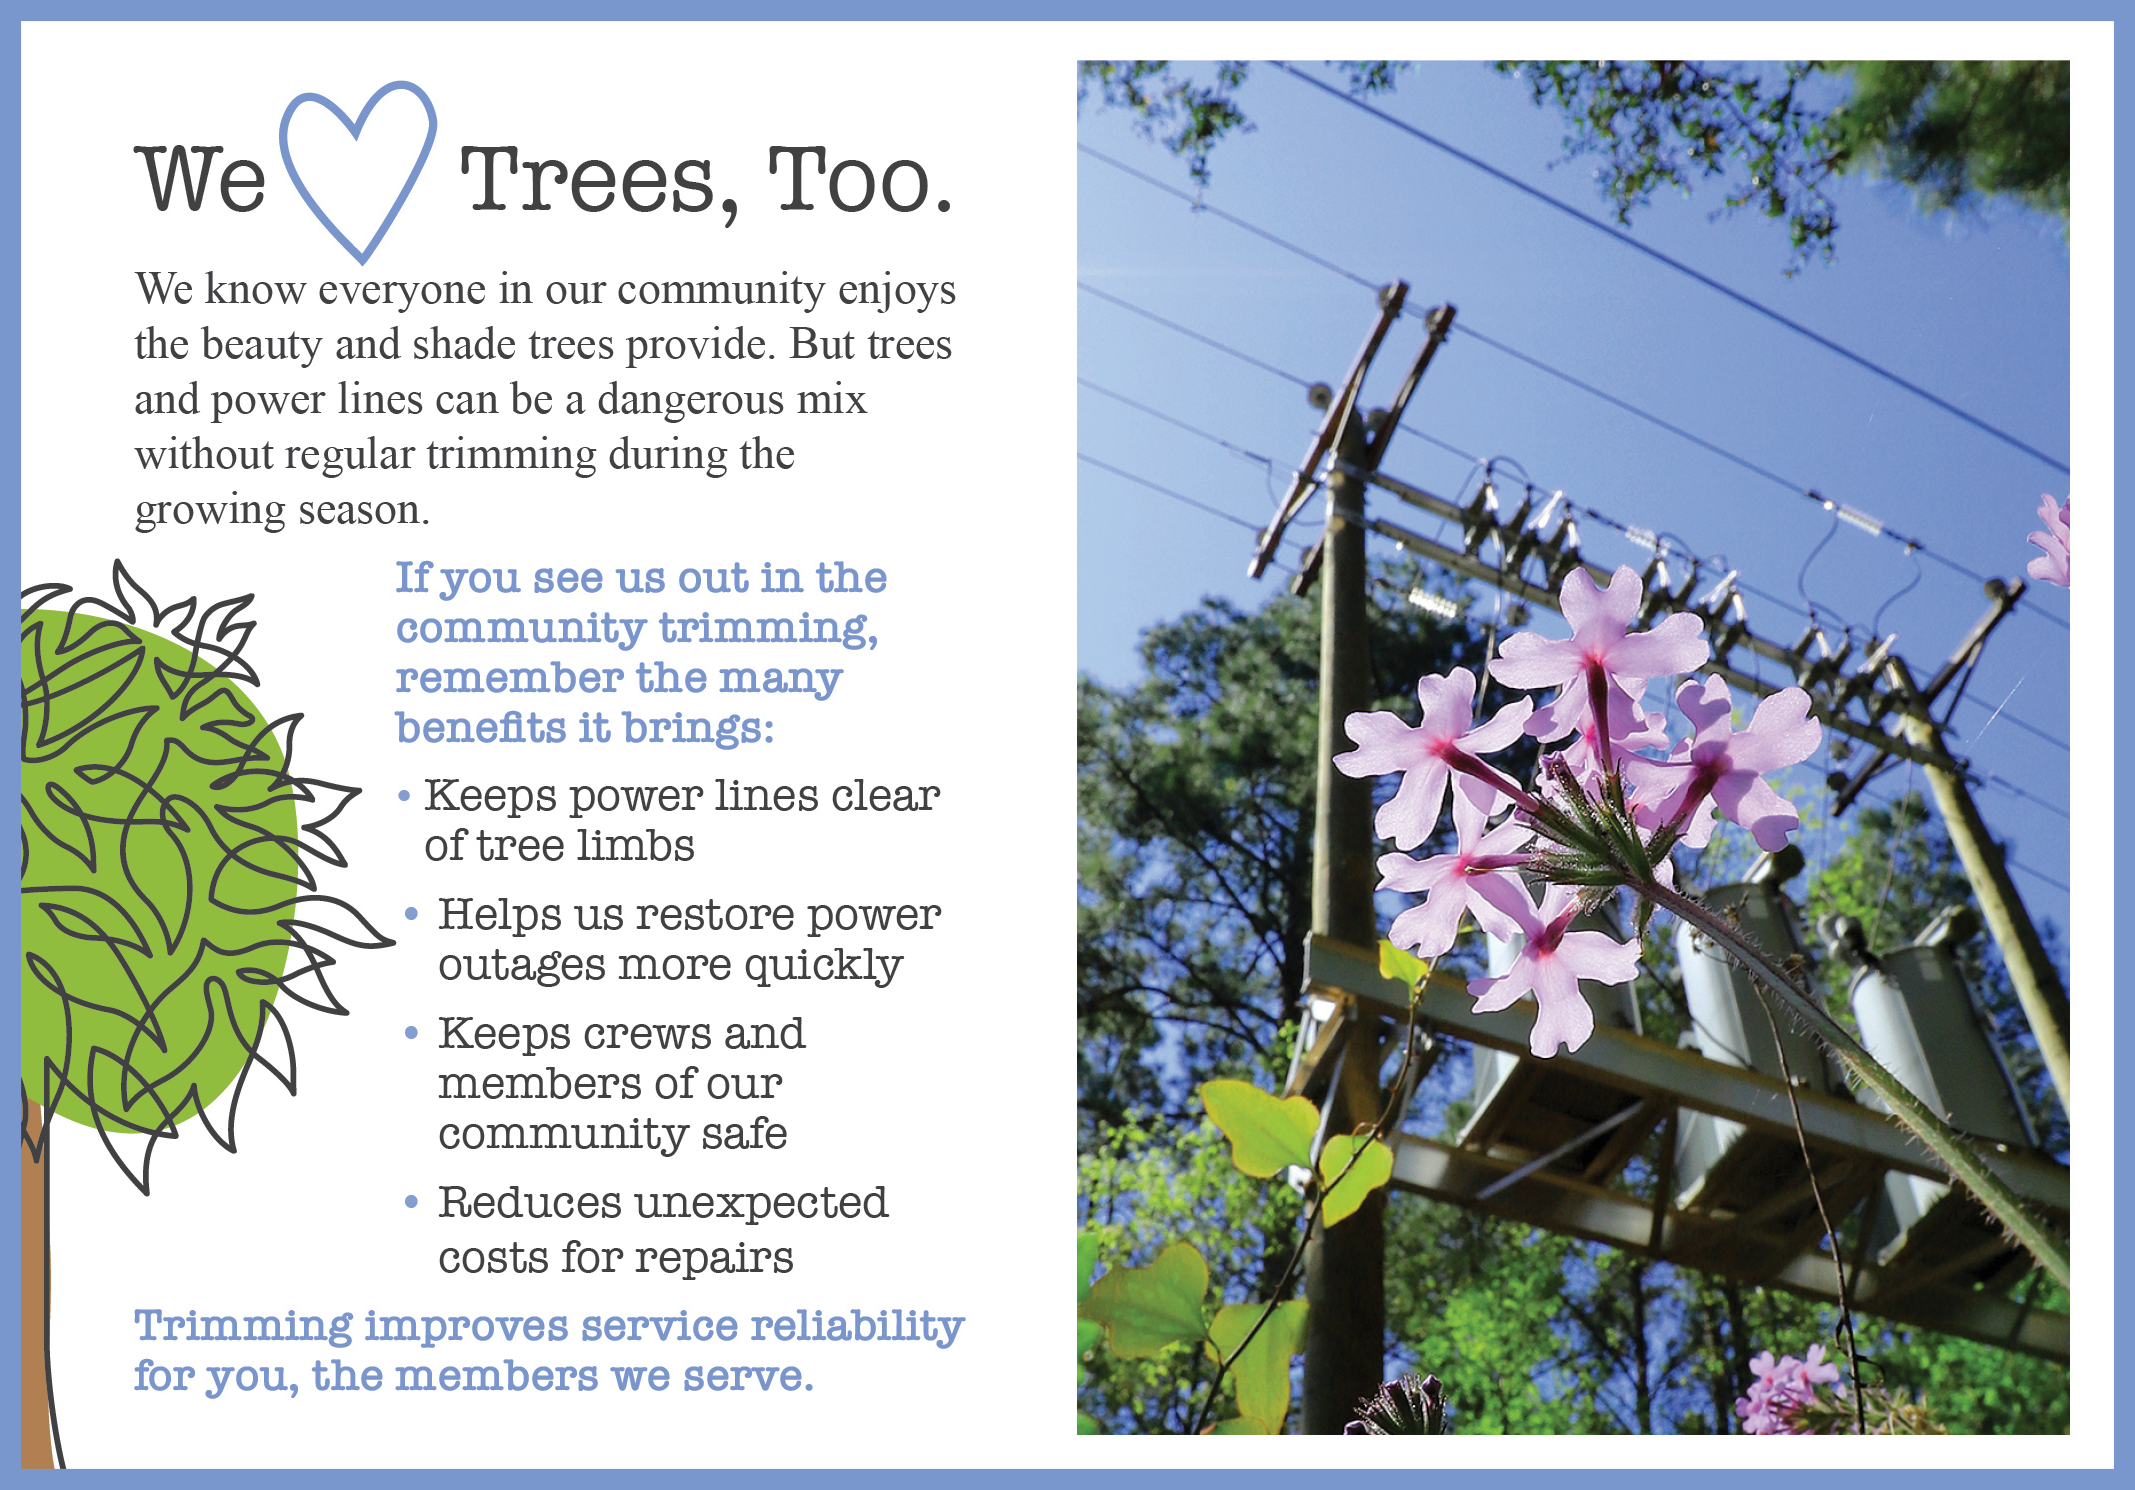 We Love Trees, Too. We know everyone in our community enjoys the beauty and shade trees provide. But trees and power lines can be a dangerous mix without regular trimming during the growing season. If you see us out in the community trimming, remember the many benefits it brings: -Keeps power lines clear of tree limbs -Helps us restore power outages more quickly -Keeps crews and members of our community safe -Reduces unexpected costs for repairs | Trimming improves service reliability for you, the members we serve.